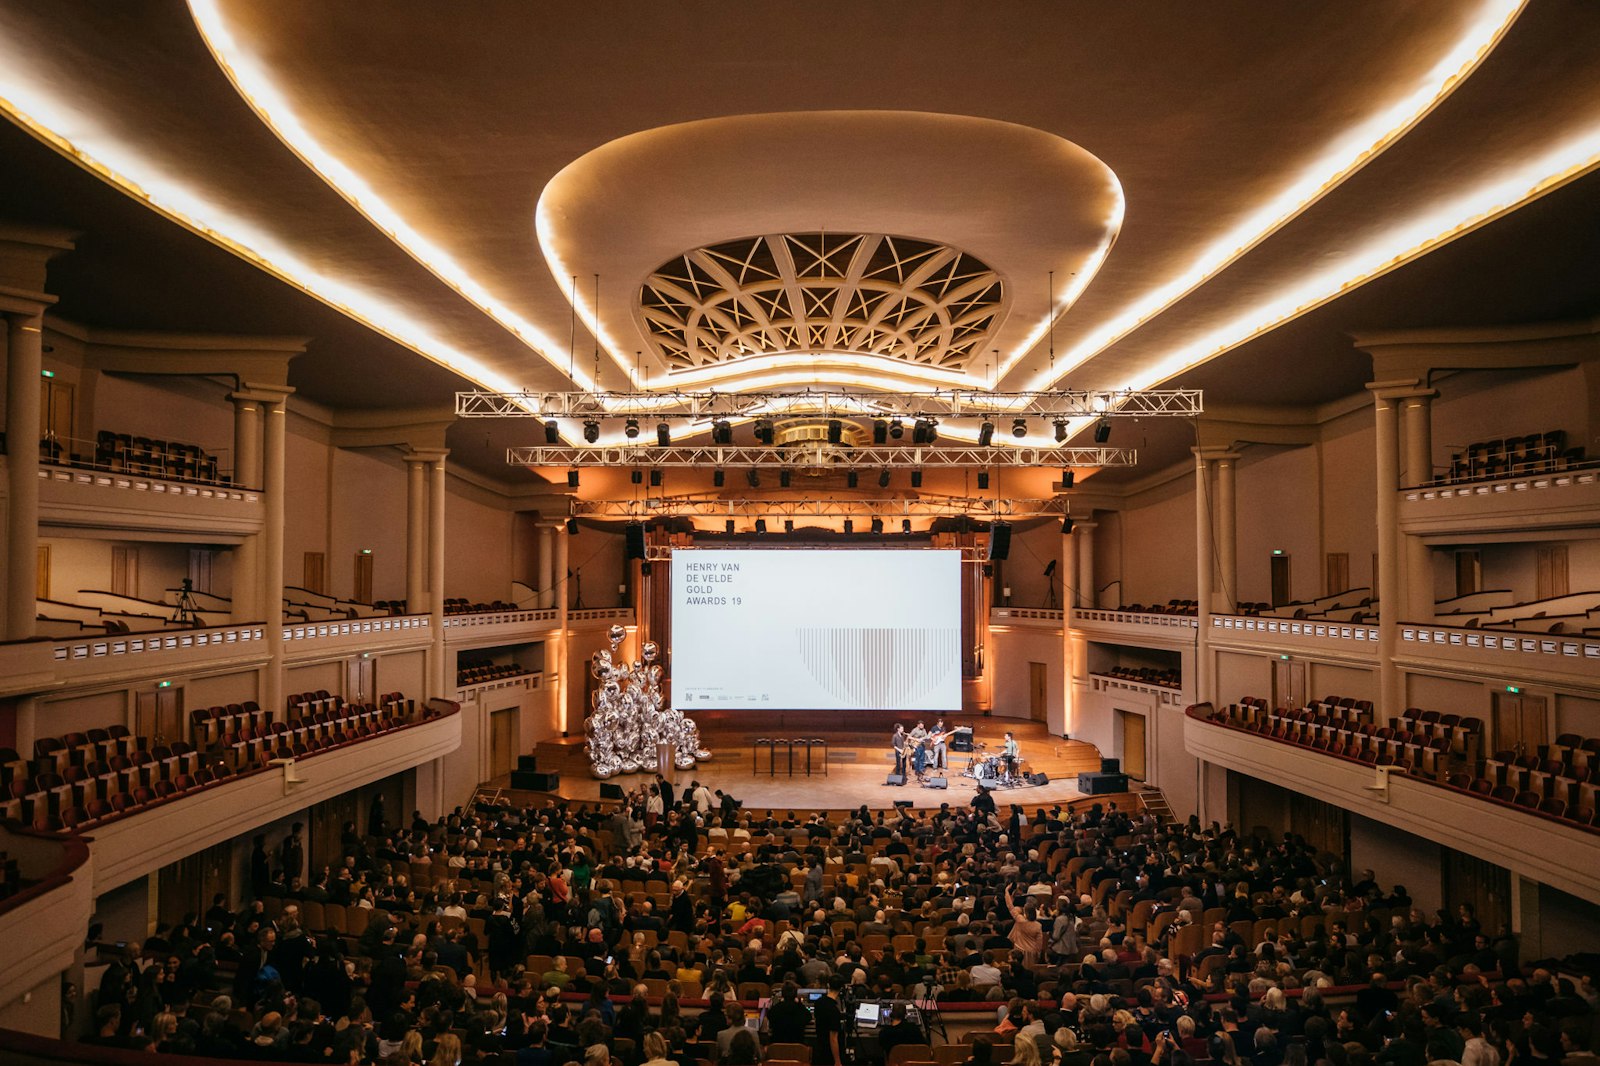 Every year since 2014, the ceremony is held in the beautiful Henry Le Boeuf Hall in Bozar